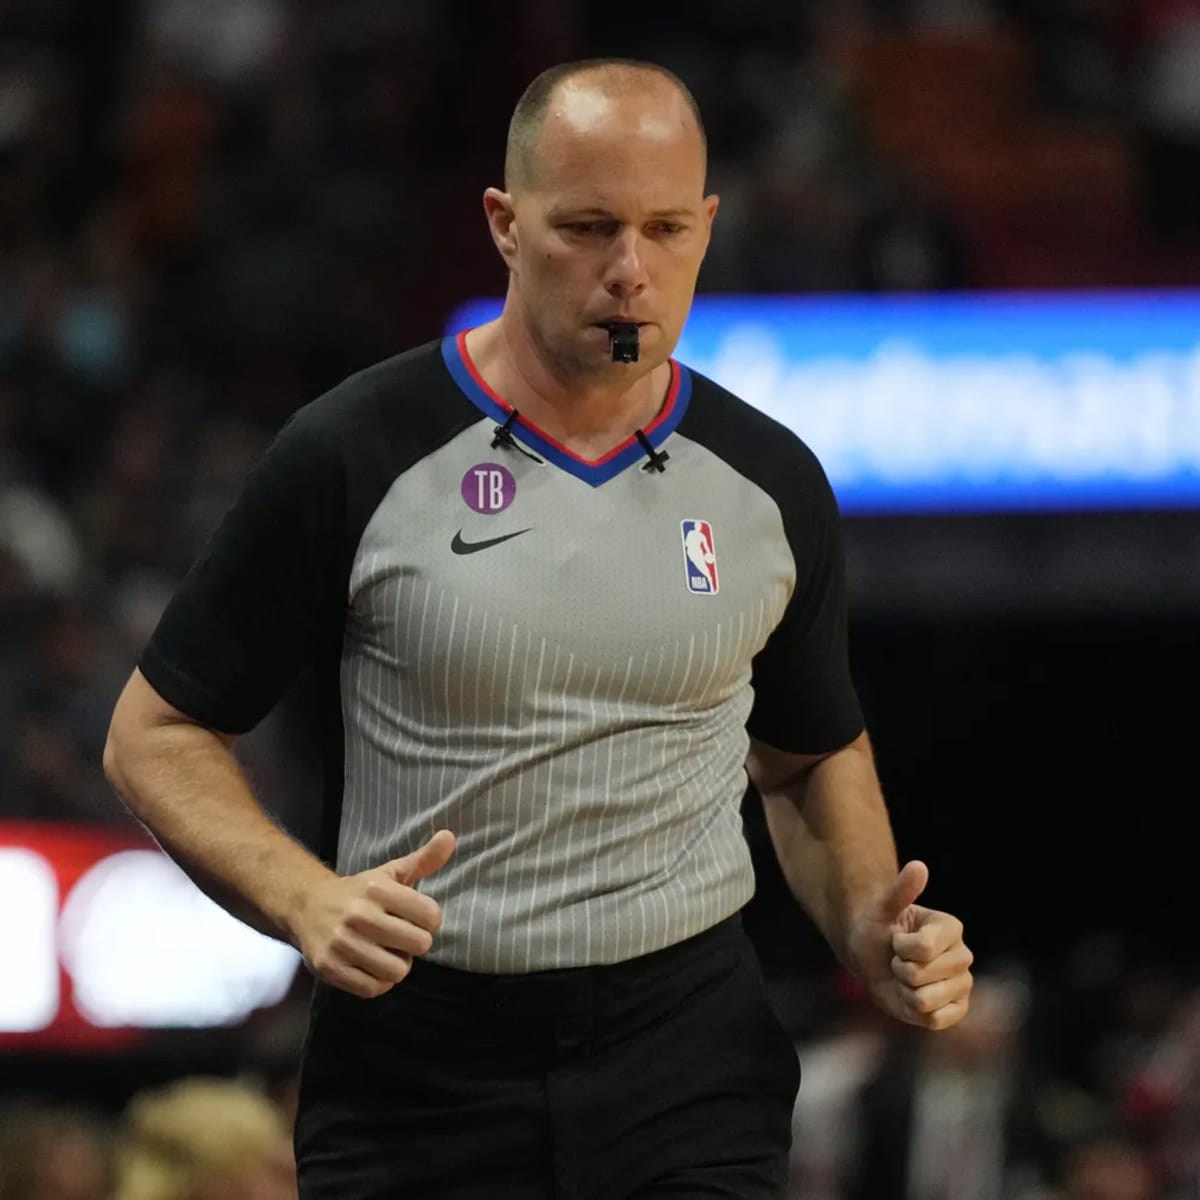 Miami HEAT is 0-10 when these refs called out games regular season